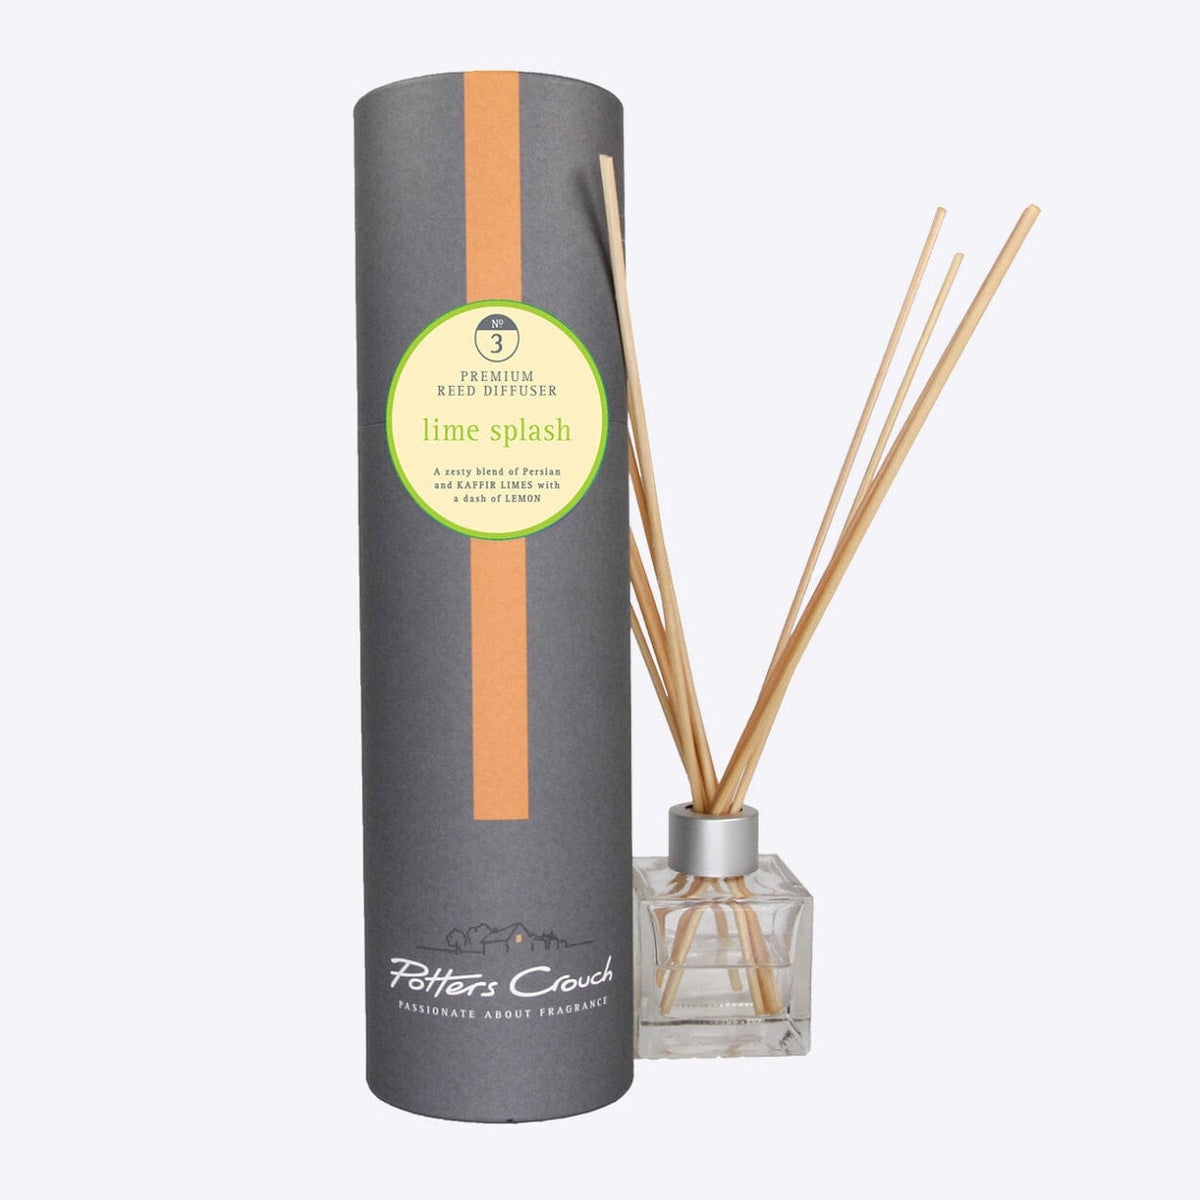 Potters Crouch Lime Splash Scented Reed Diffuser